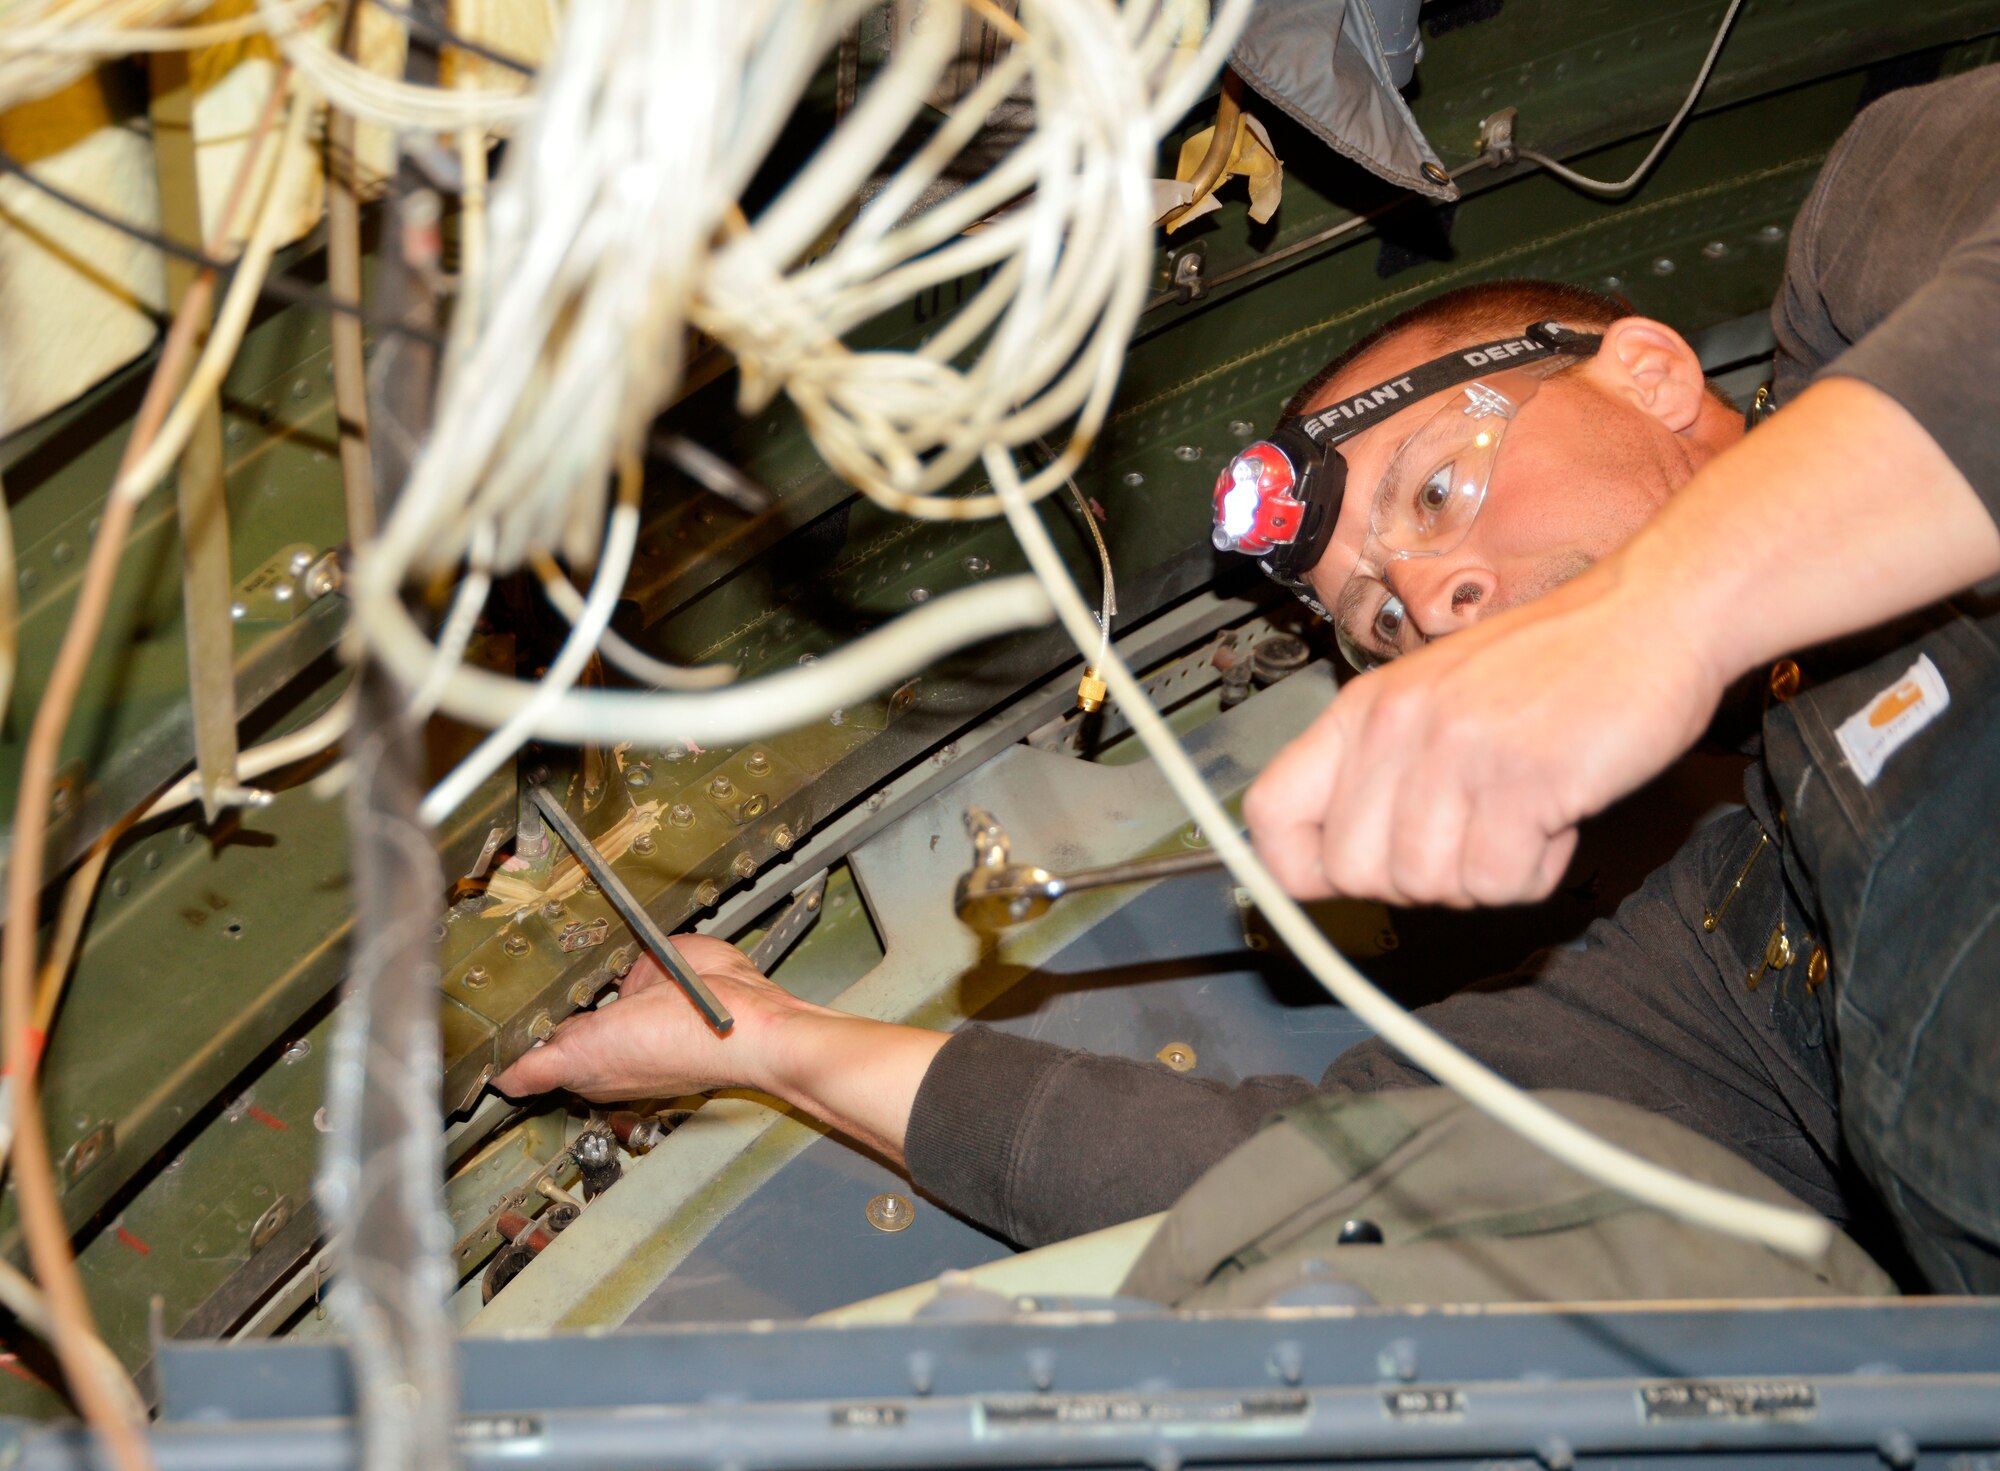 Chris Grimsley, 560th Aircraft Maintenance Squadron sheet metal worker, removes the last remaining bolts which held the C-130H nose and fuselage together. (U.S. Air Force photo by Ed Aspera)